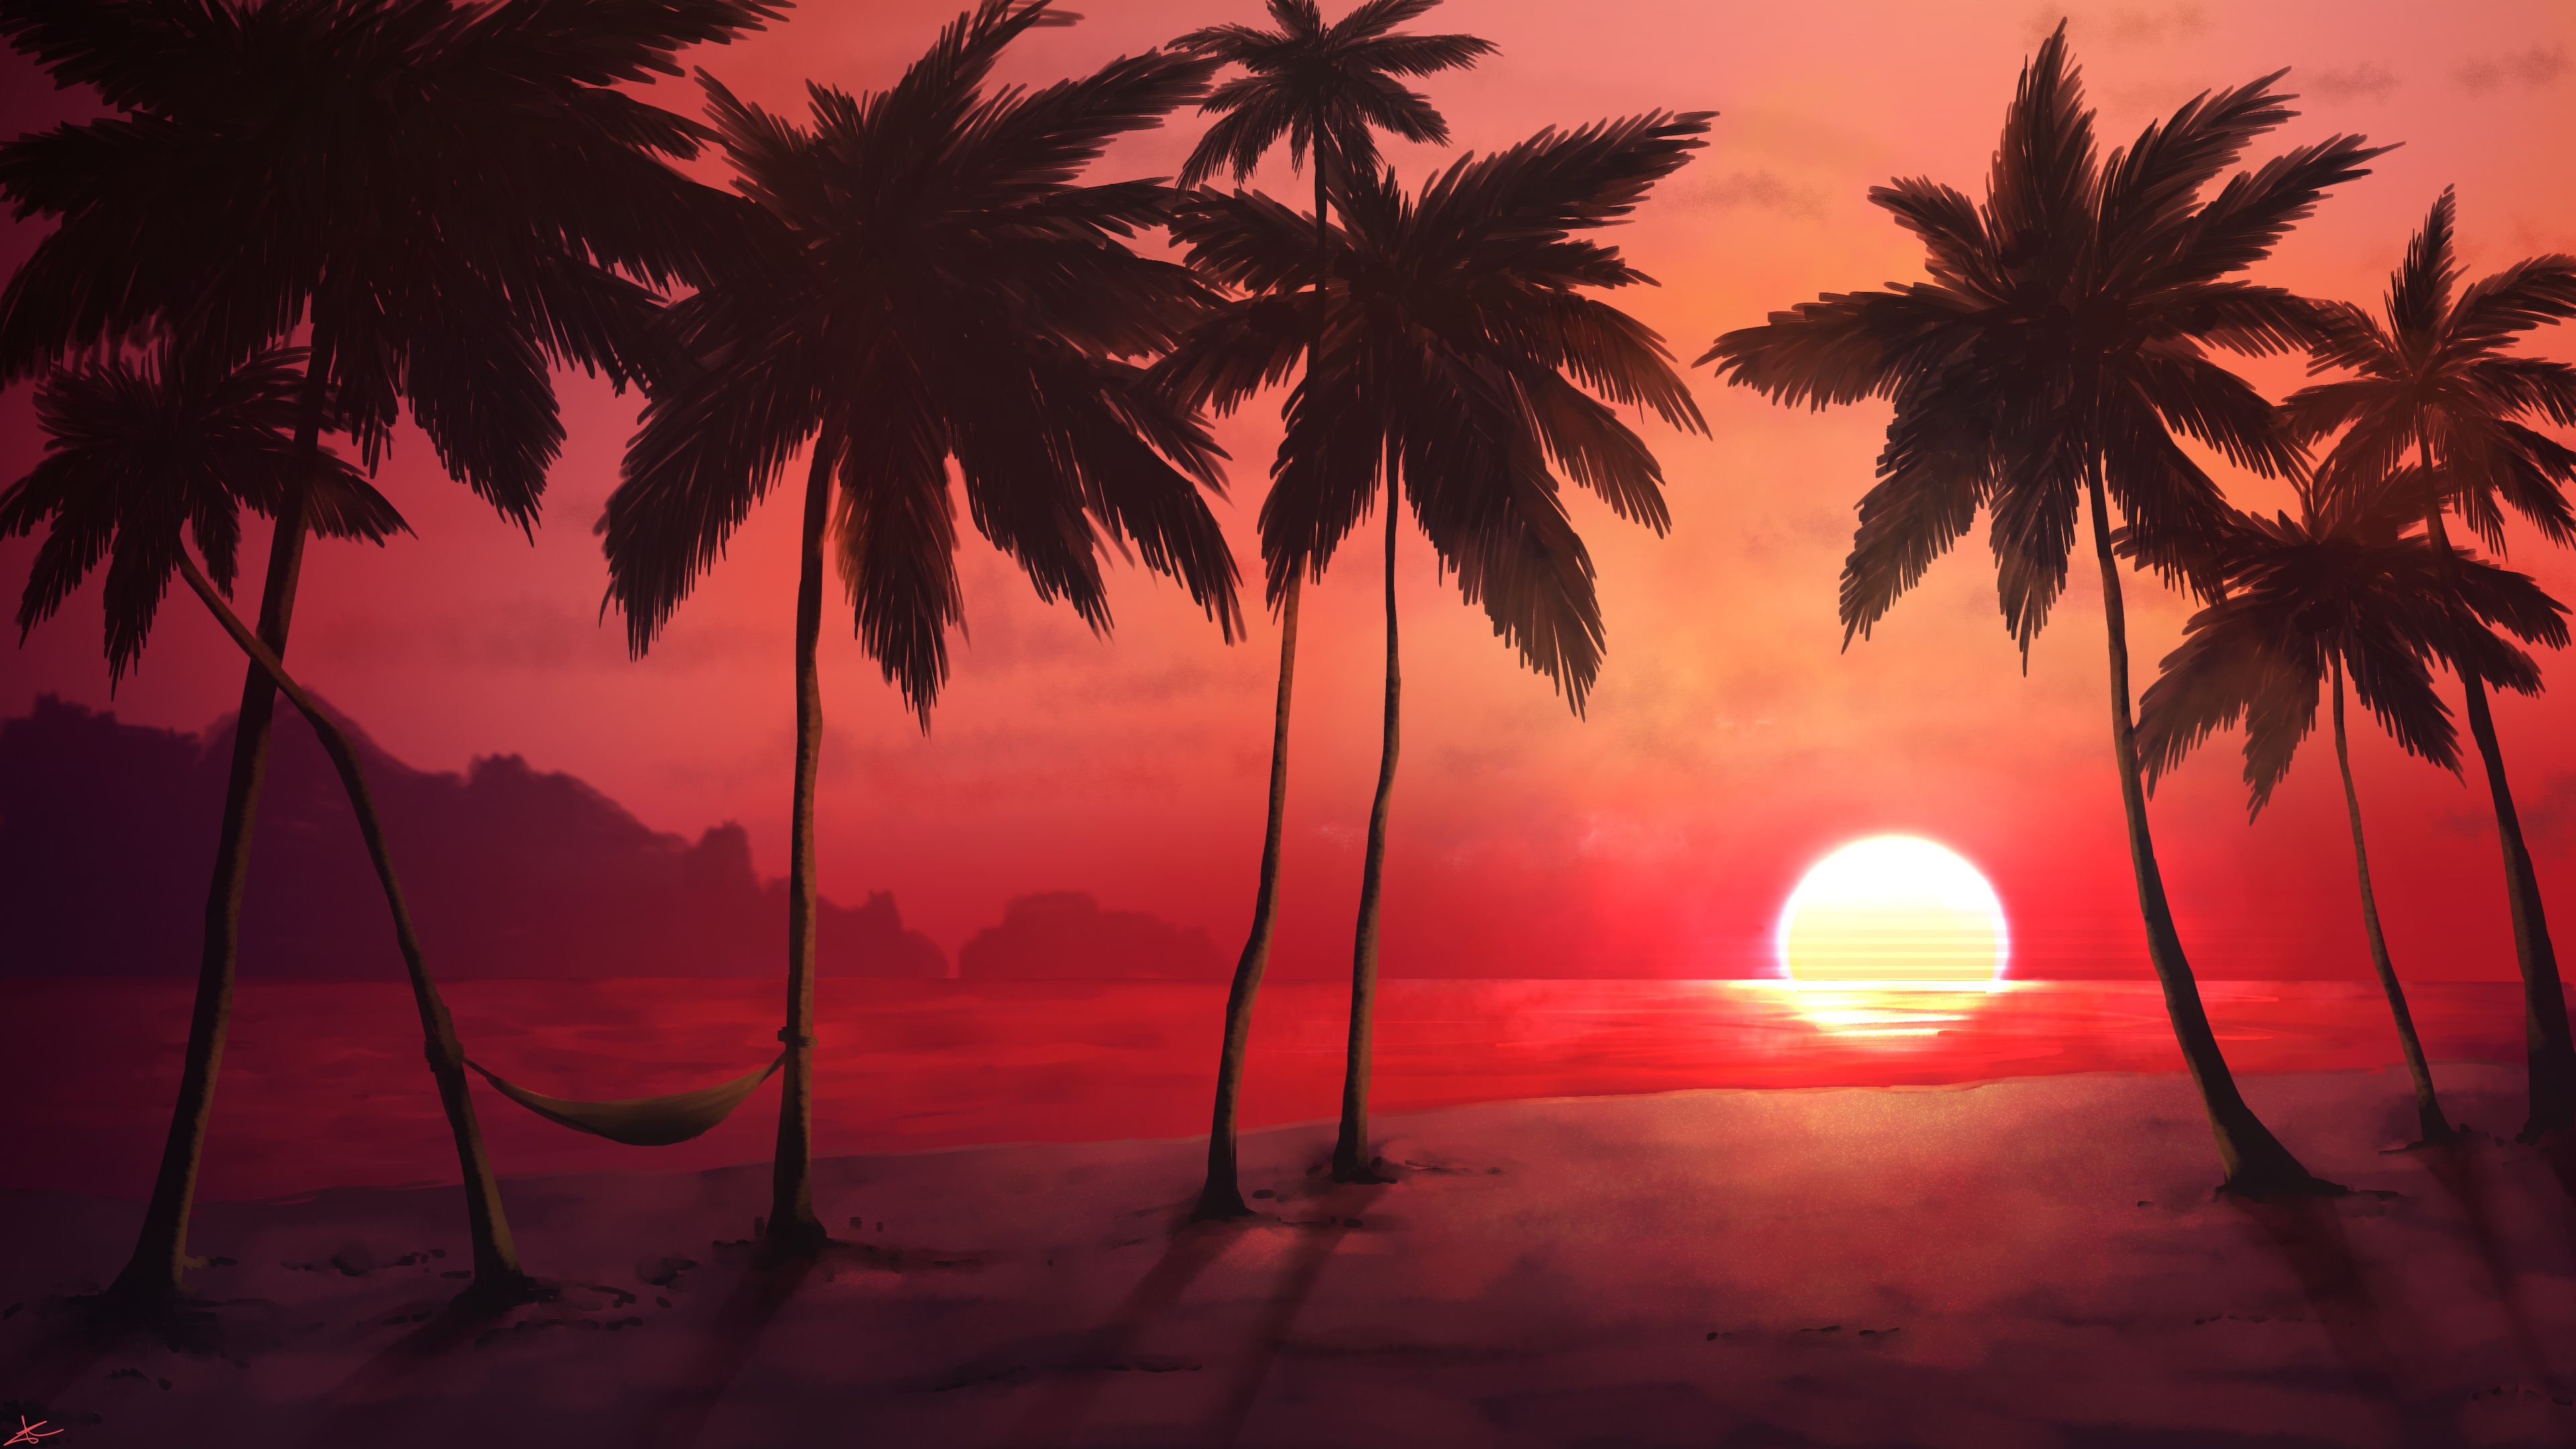 Sunset 4K Wallpaper, Tropical, Trees, Silhouette, Dawn, Warm, Nature